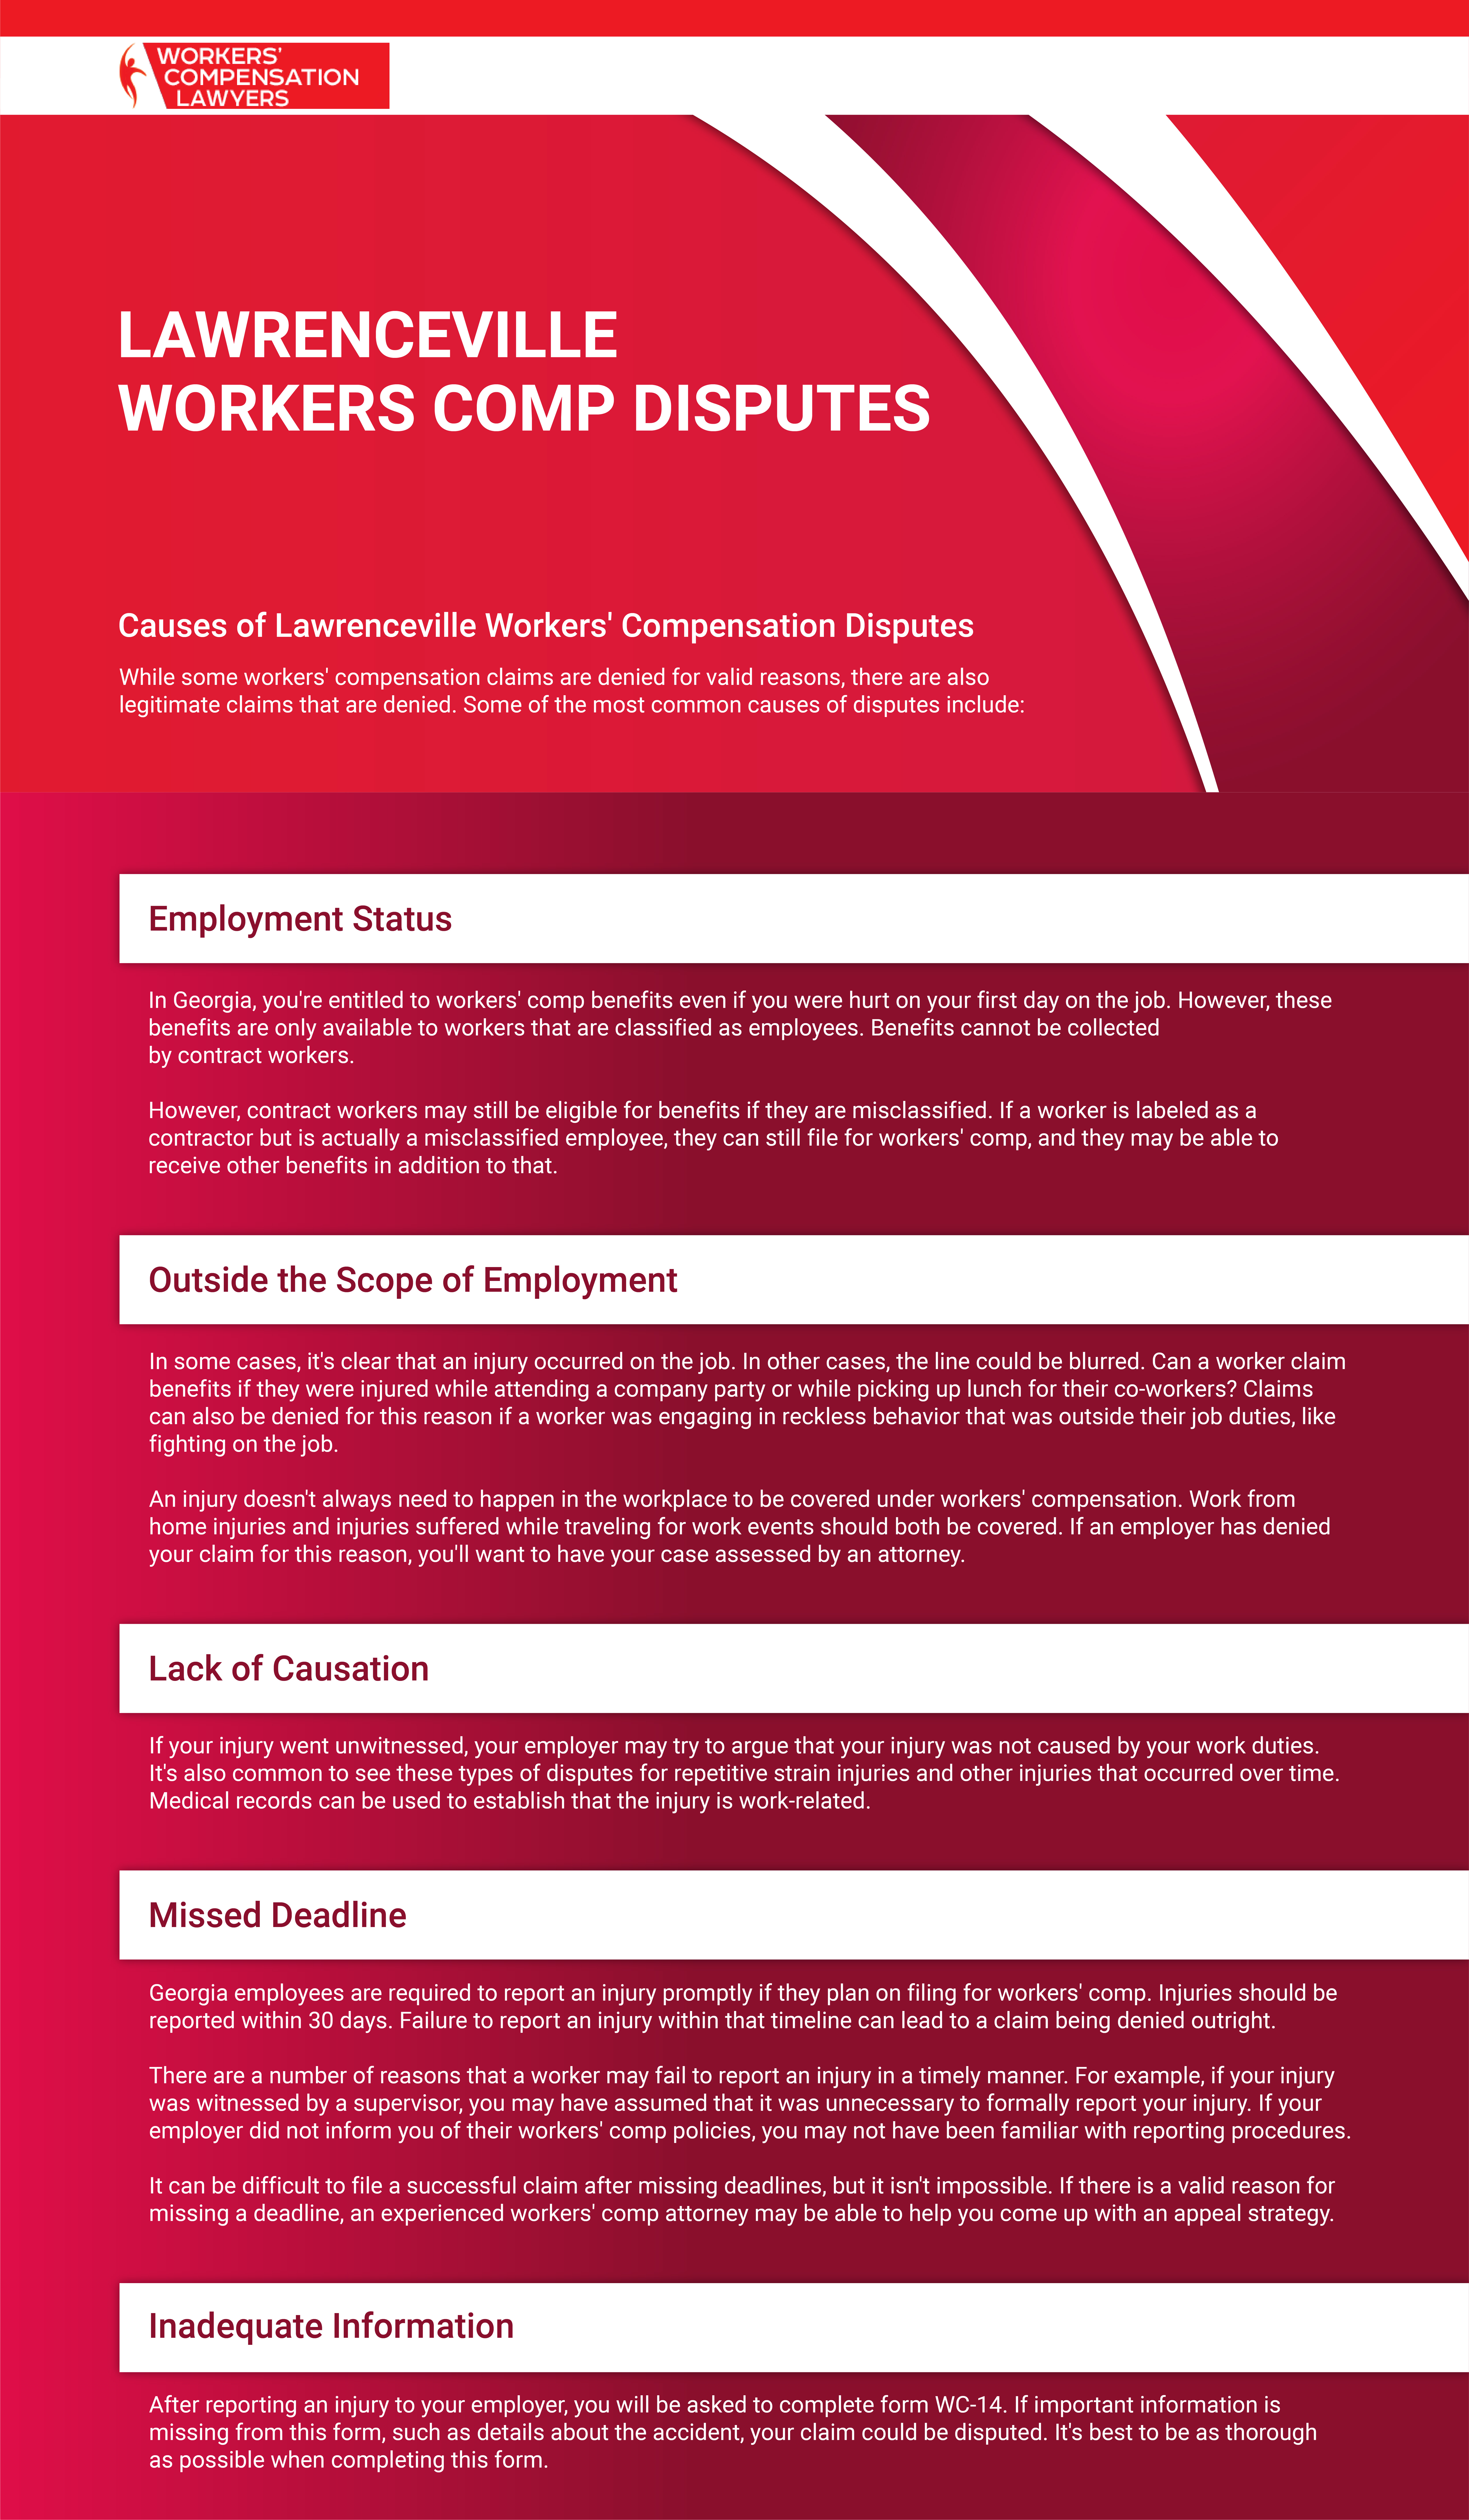 Lawrenceville Workers Compensation Disputes Infographic